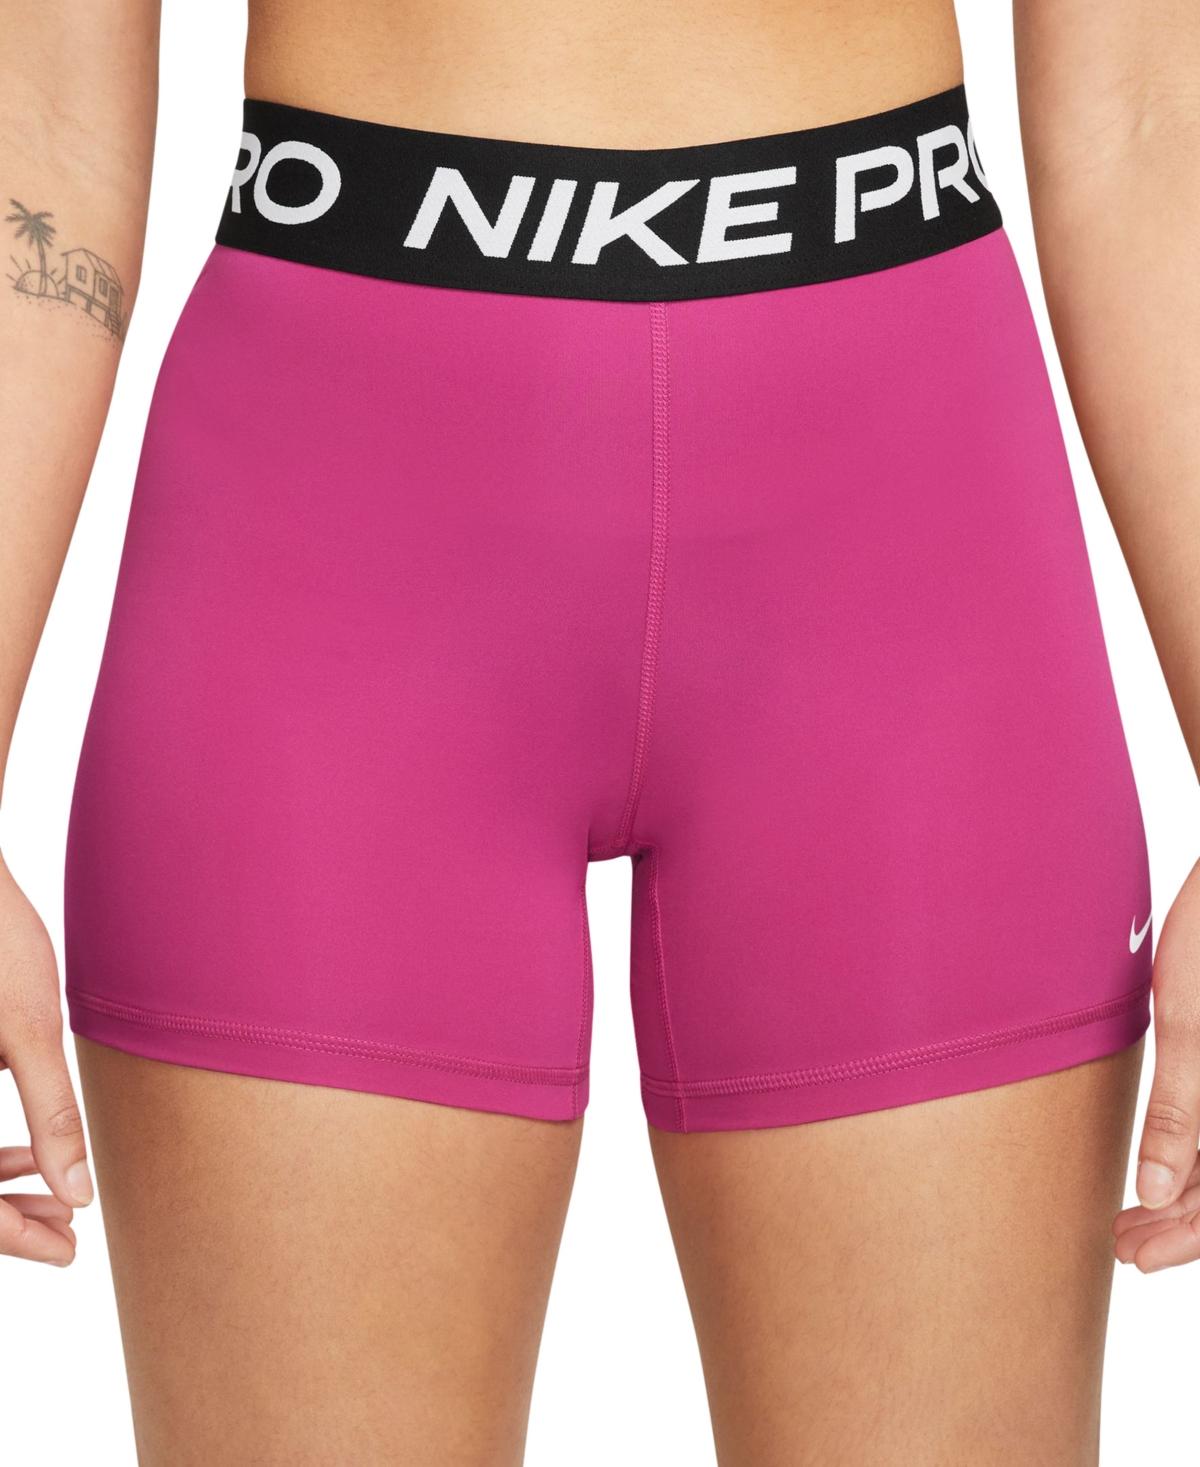 Nike Pro 365 5" Shorts in Pink | Lyst